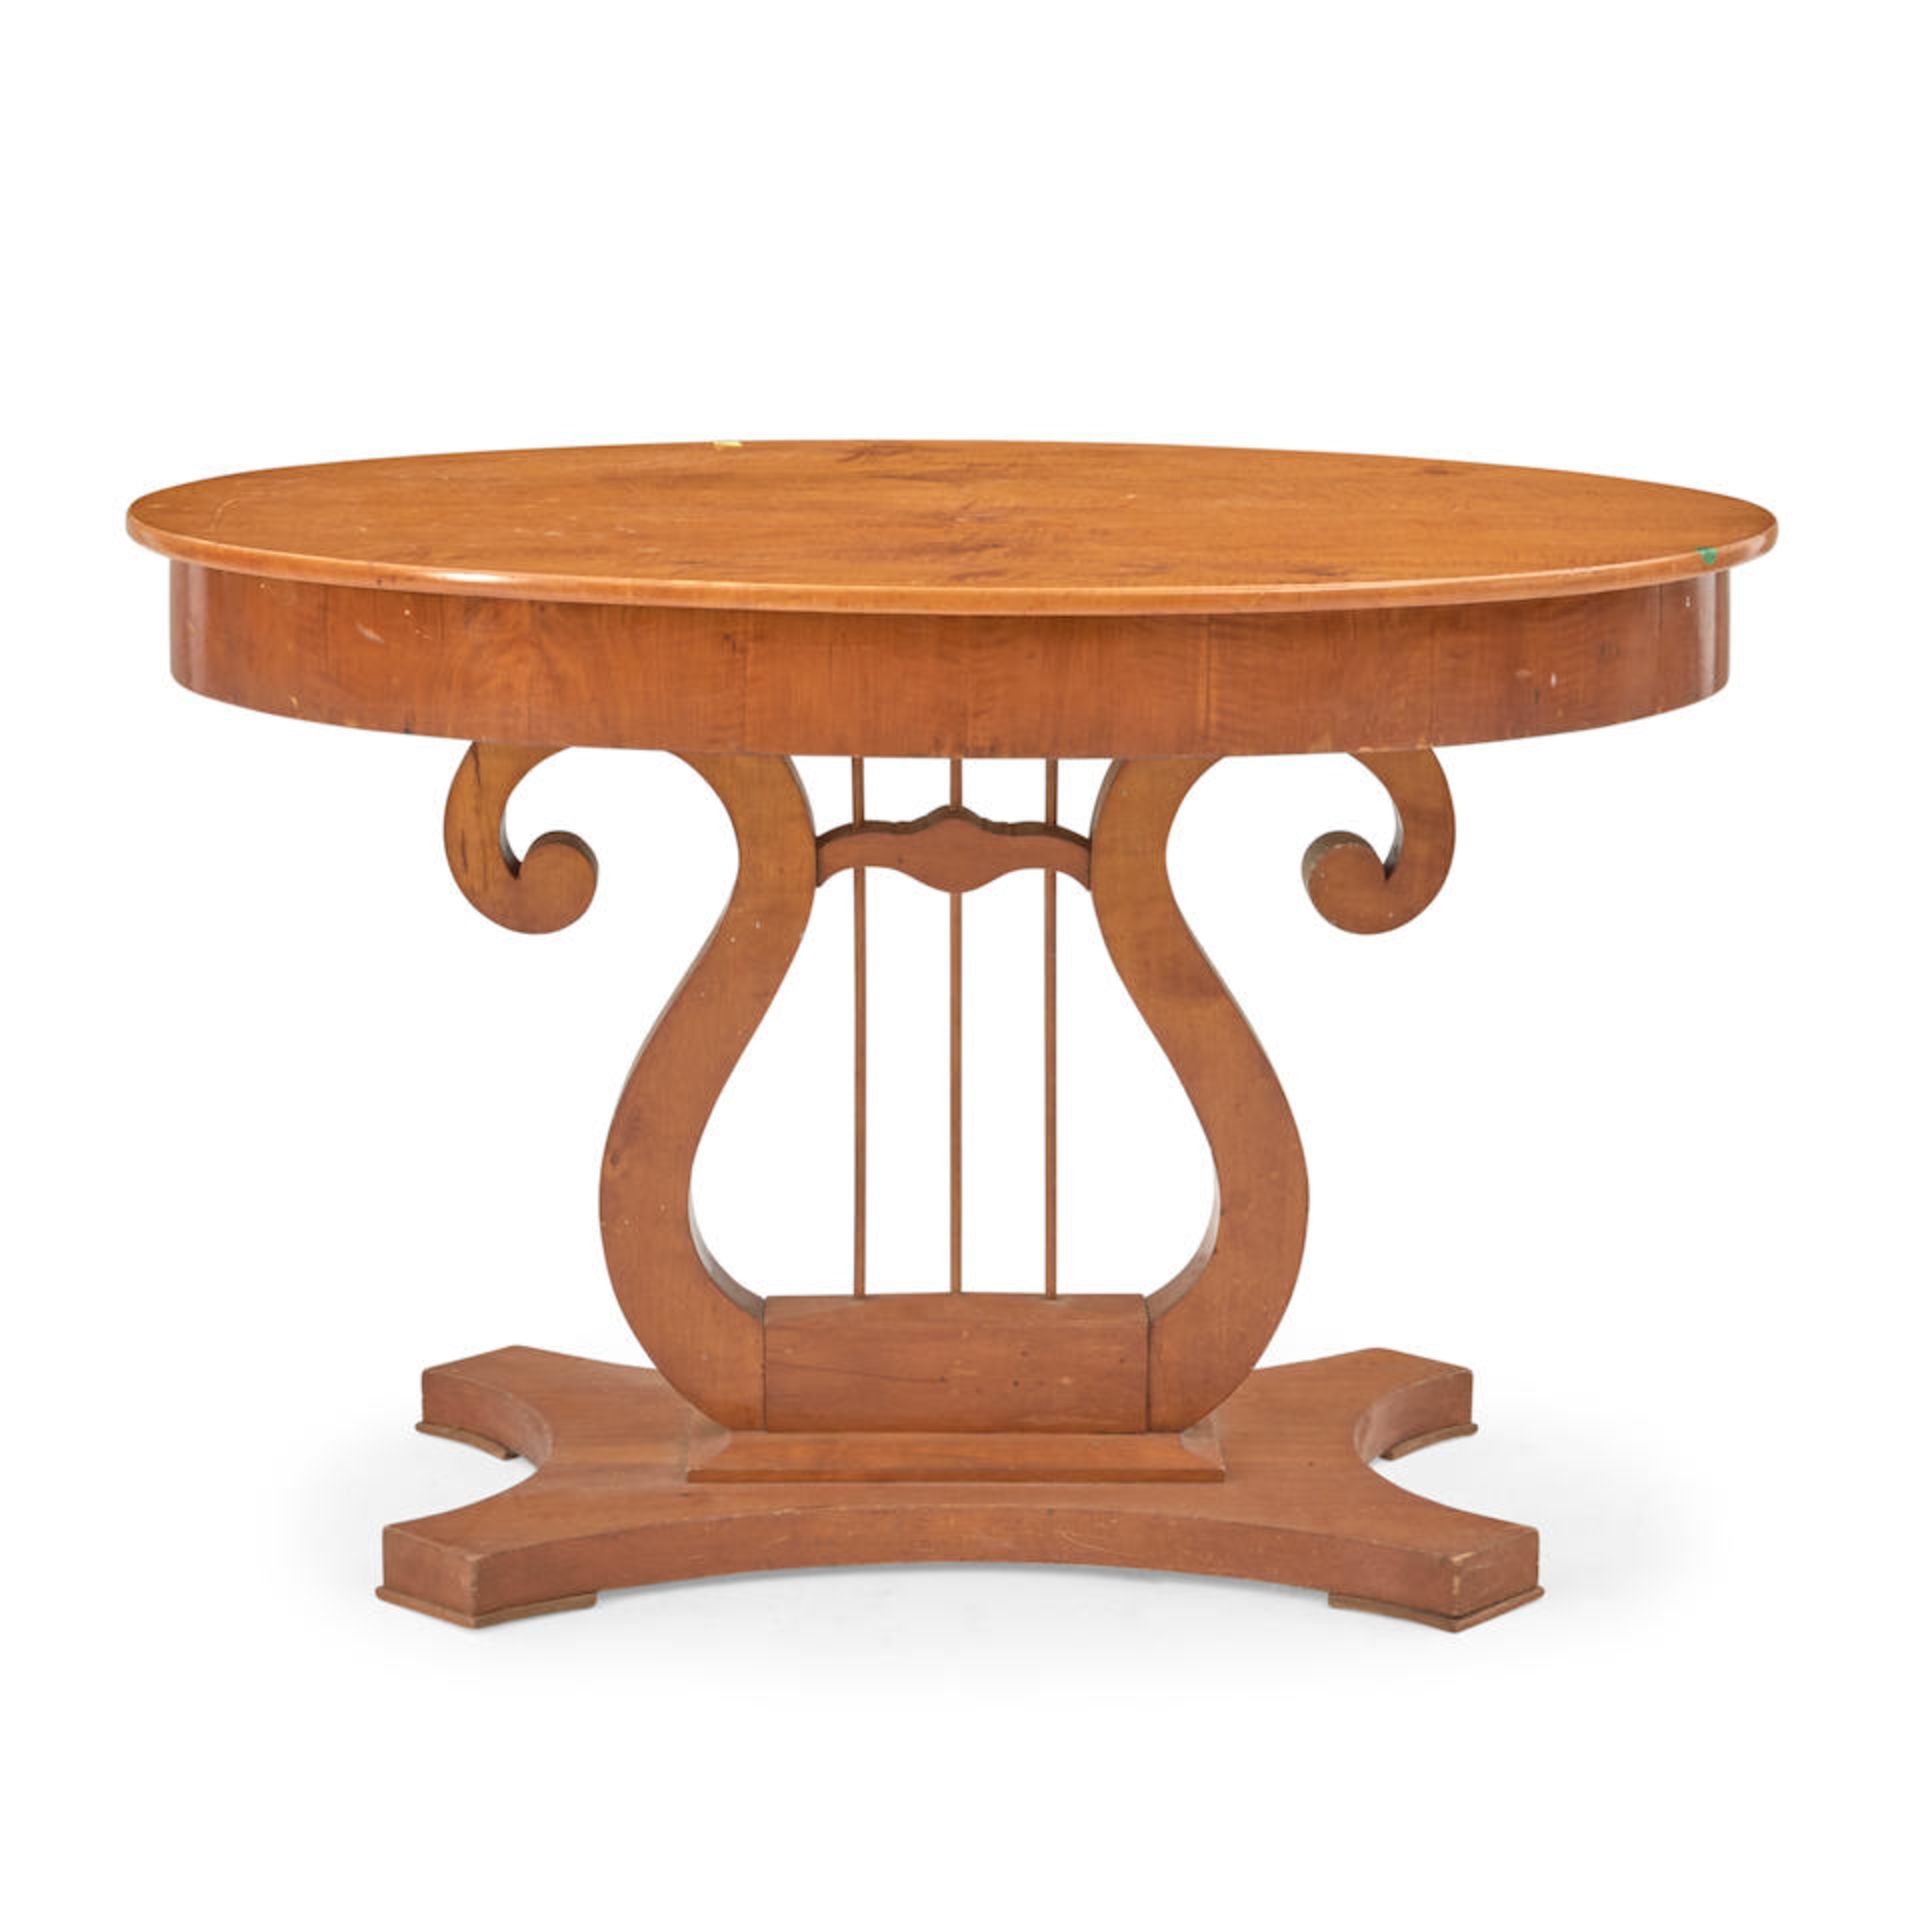 NEOCLASSICAL-STYLE TIGER-MAPLE LIBRARY TABLE